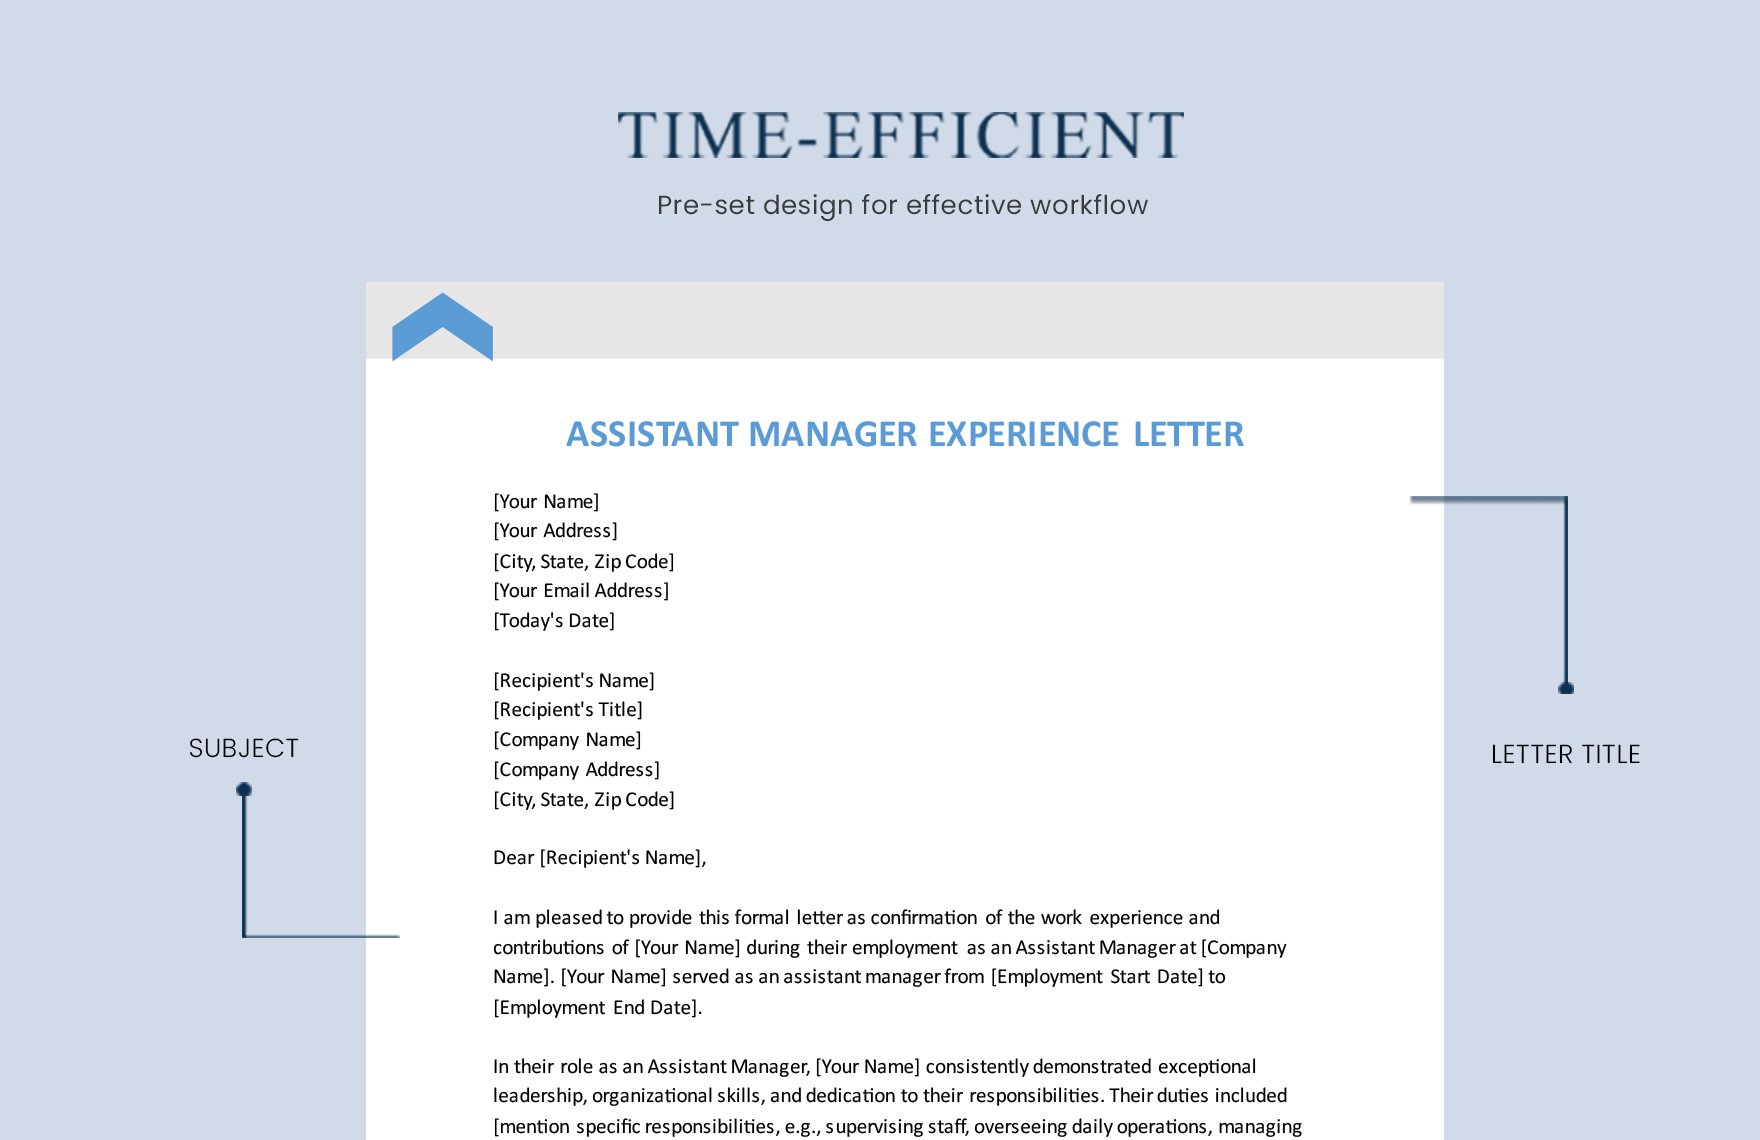 Assistant Manager Experience Letter